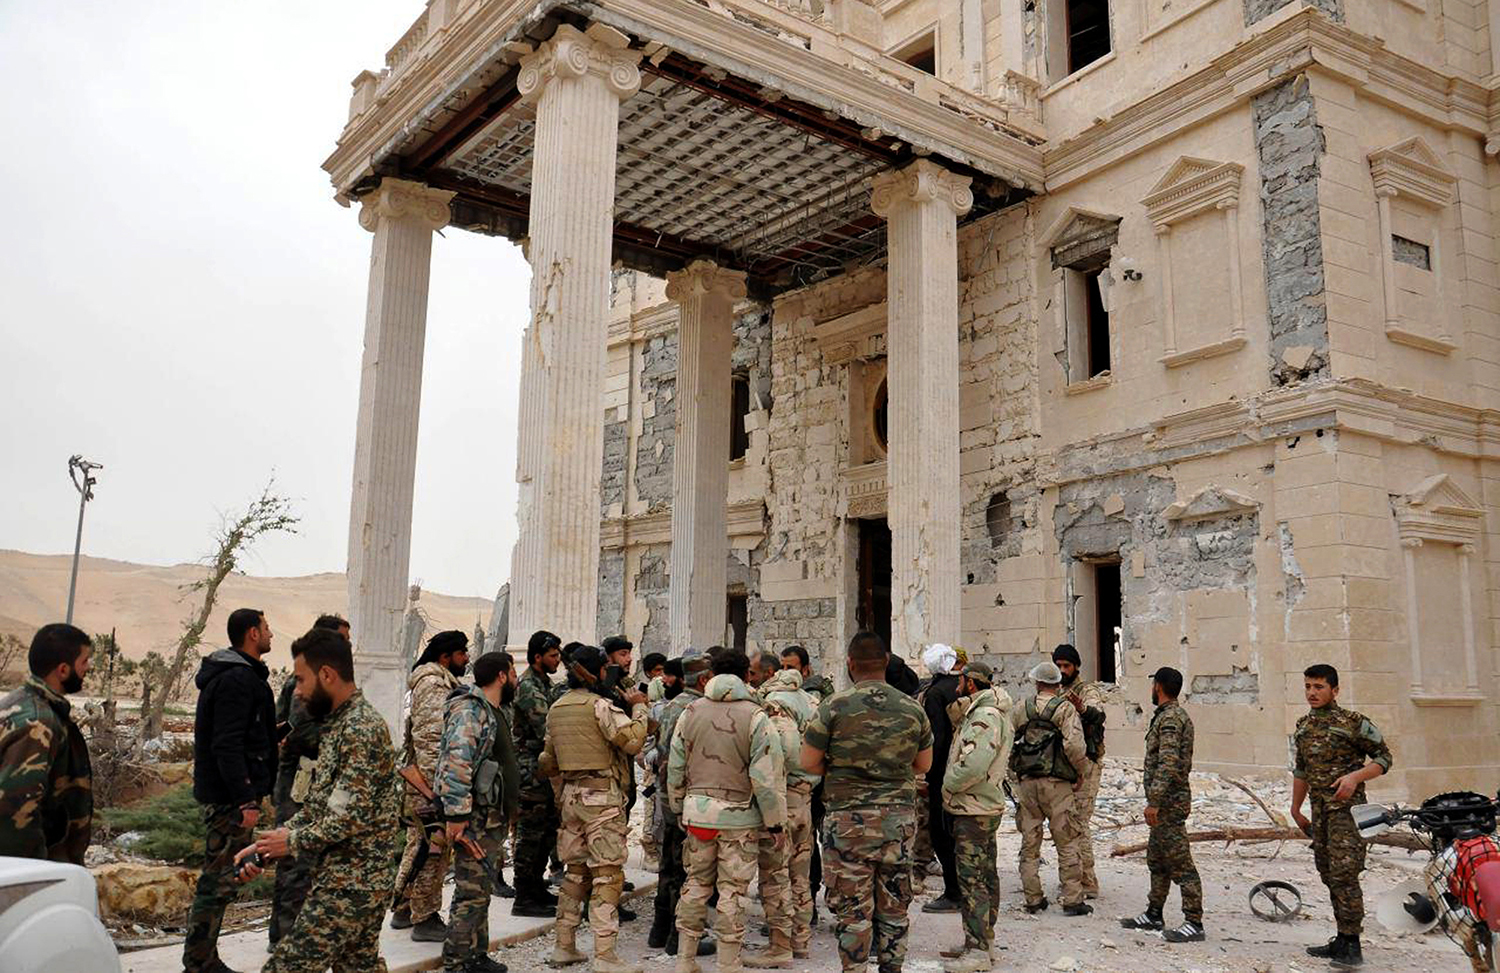 FILE -- In this file photo released March 24, 2016, by the Syrian official news agency SANA, Syrian government soldiers gather outside a damaged palace, in Palmyra, central Syria. Palmyra, the archaeological gem that Islamic State fighters retook Sunday, Dec. 11, 2016, from Syrian troops is a desert oasis surrounded by palm trees, and a UNESCO world heritage site, that boasts 2,000-year-old towering Roman-era colonnades and priceless artifacts. It is also a strategic crossroads linking the Syrian capital, Damascus, with the country's east and neighboring Iraq. (SANA via AP, File)